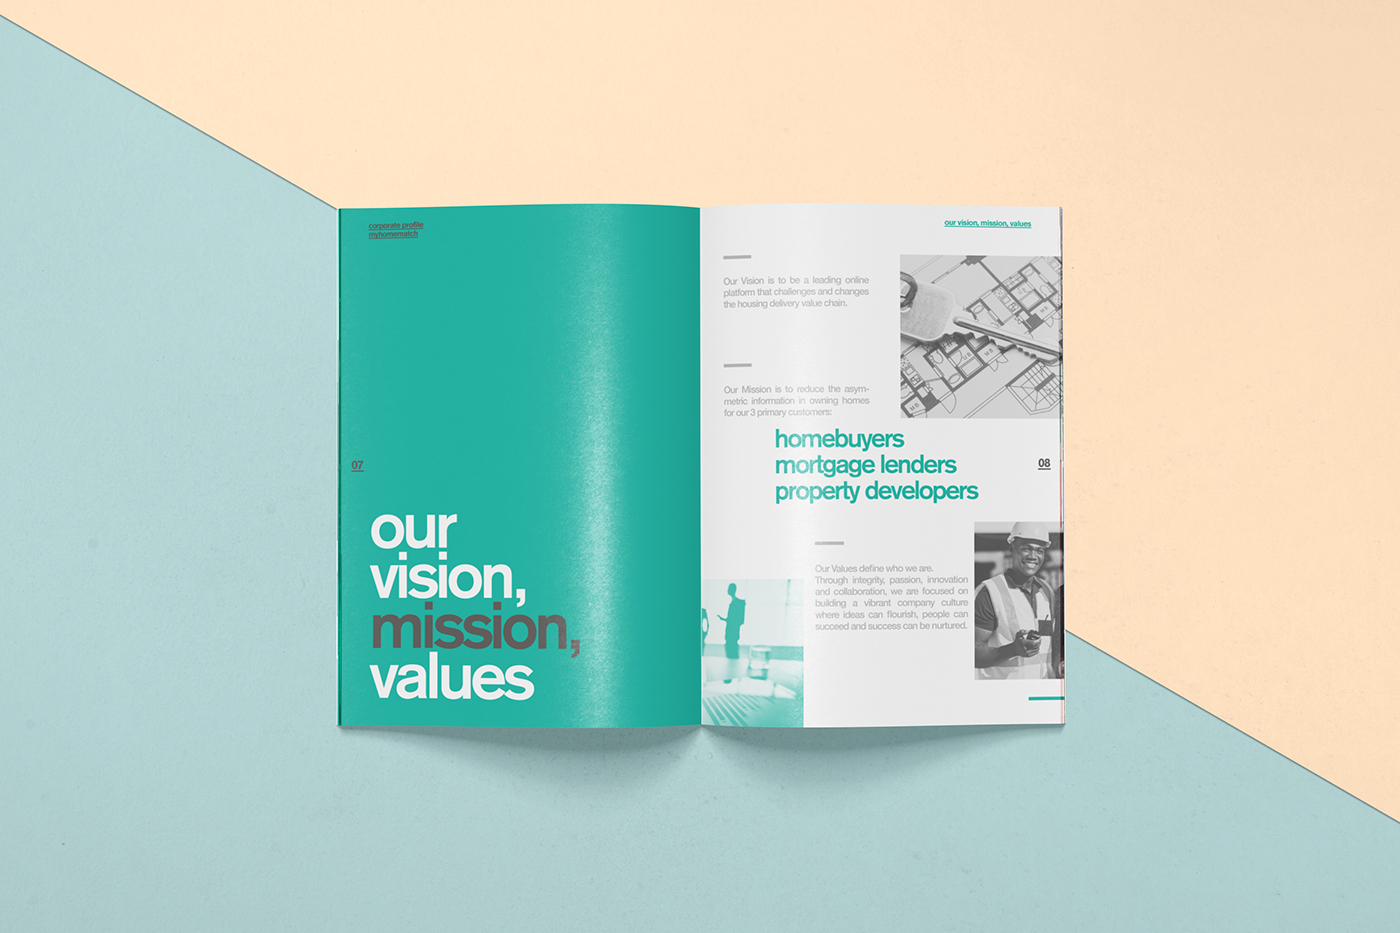 myhomematch design brochure Booklet Corporate Profile real estate Layout simple clean typographic bold company